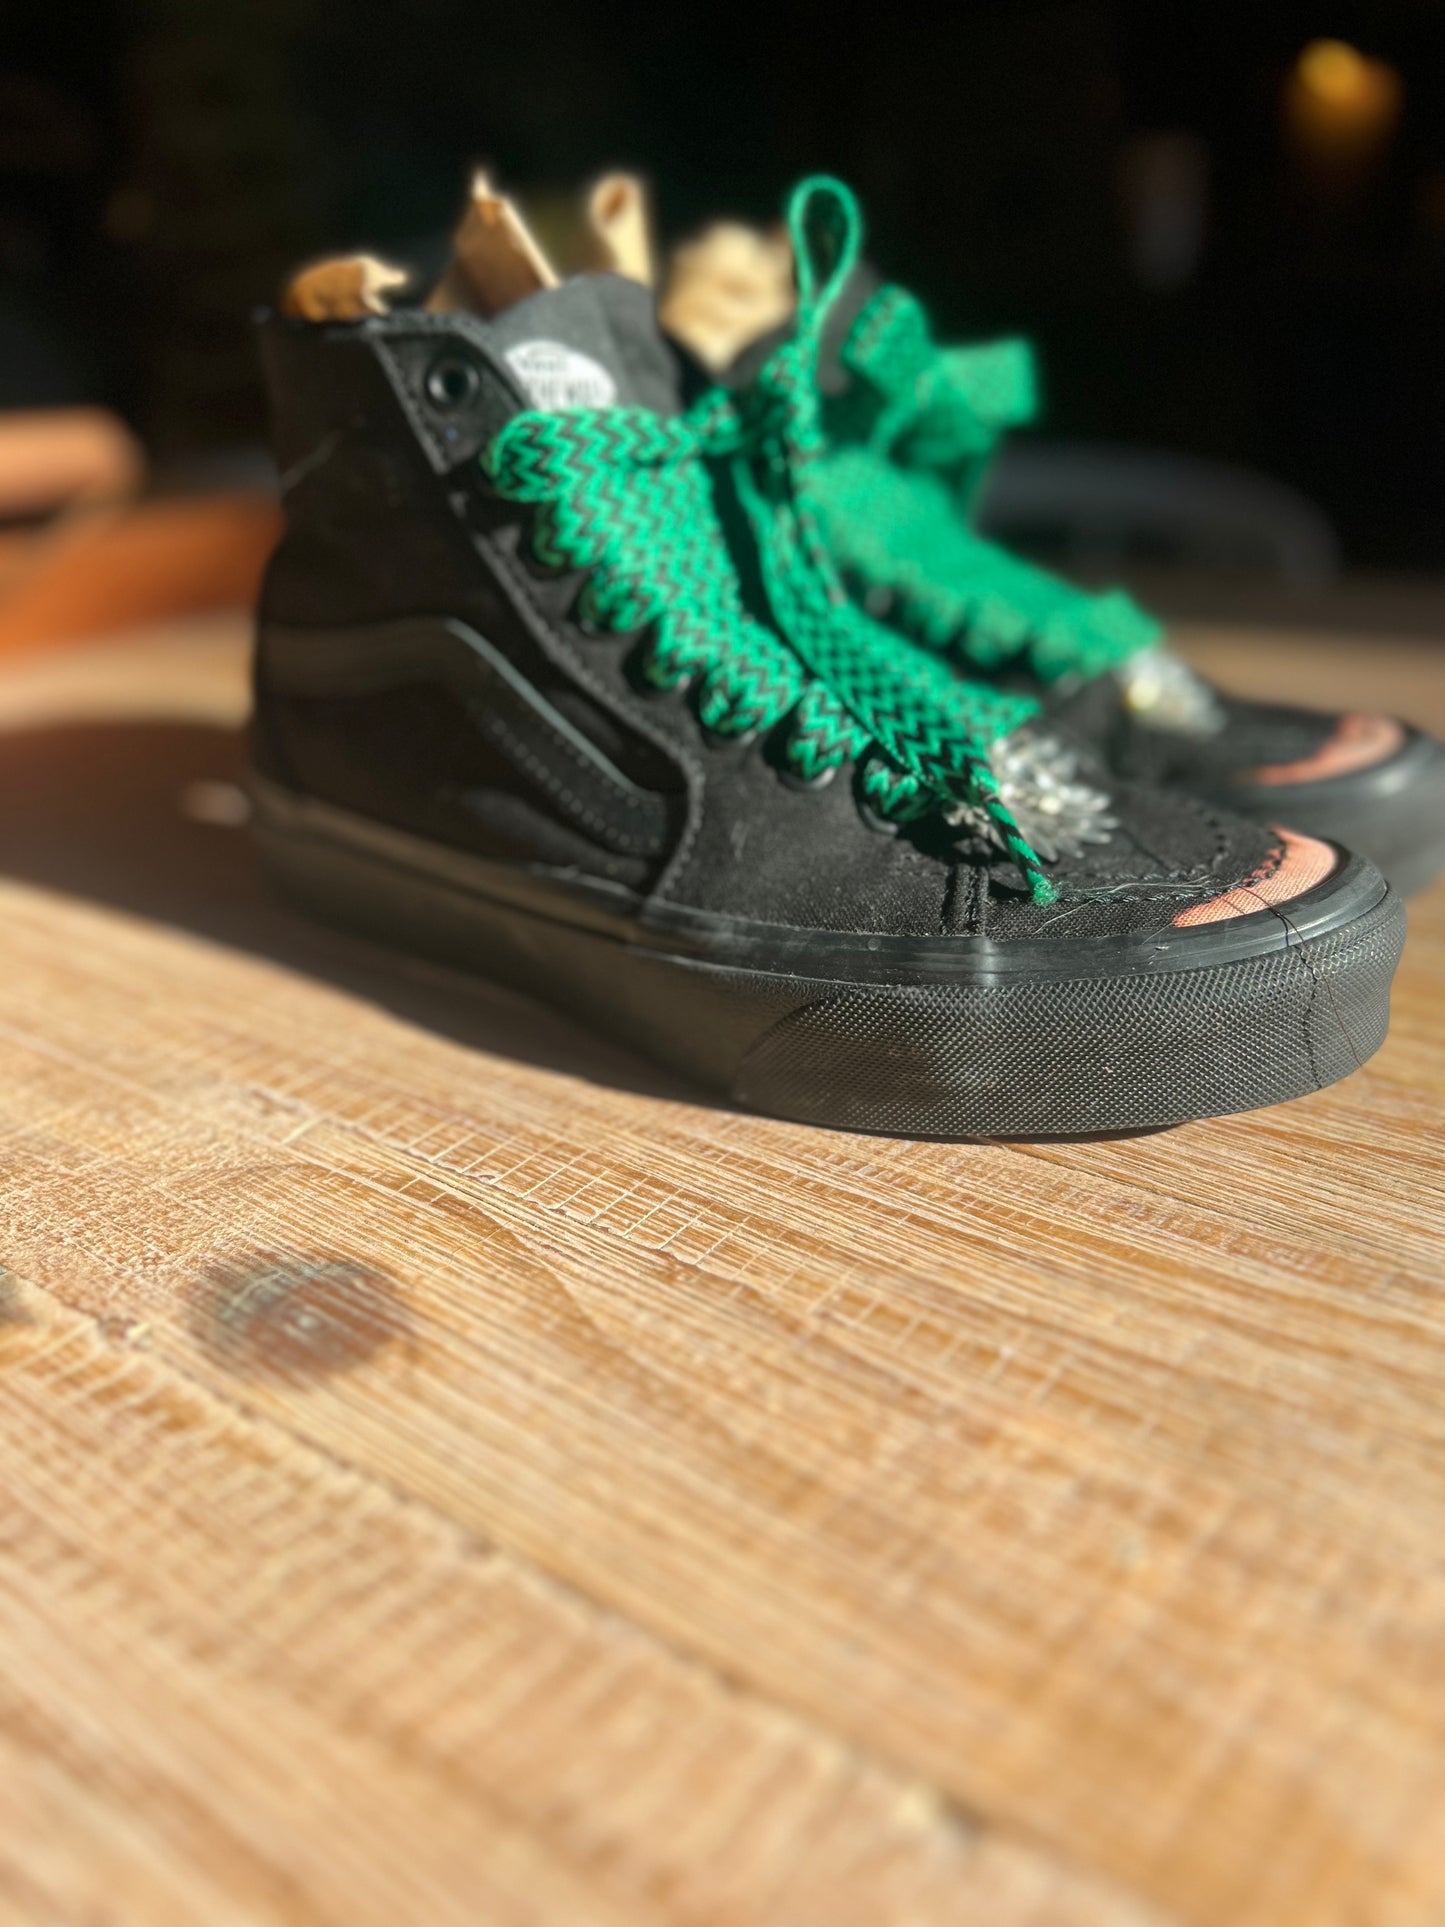 Victorious Sneaks. Re-done by hand. Size 7